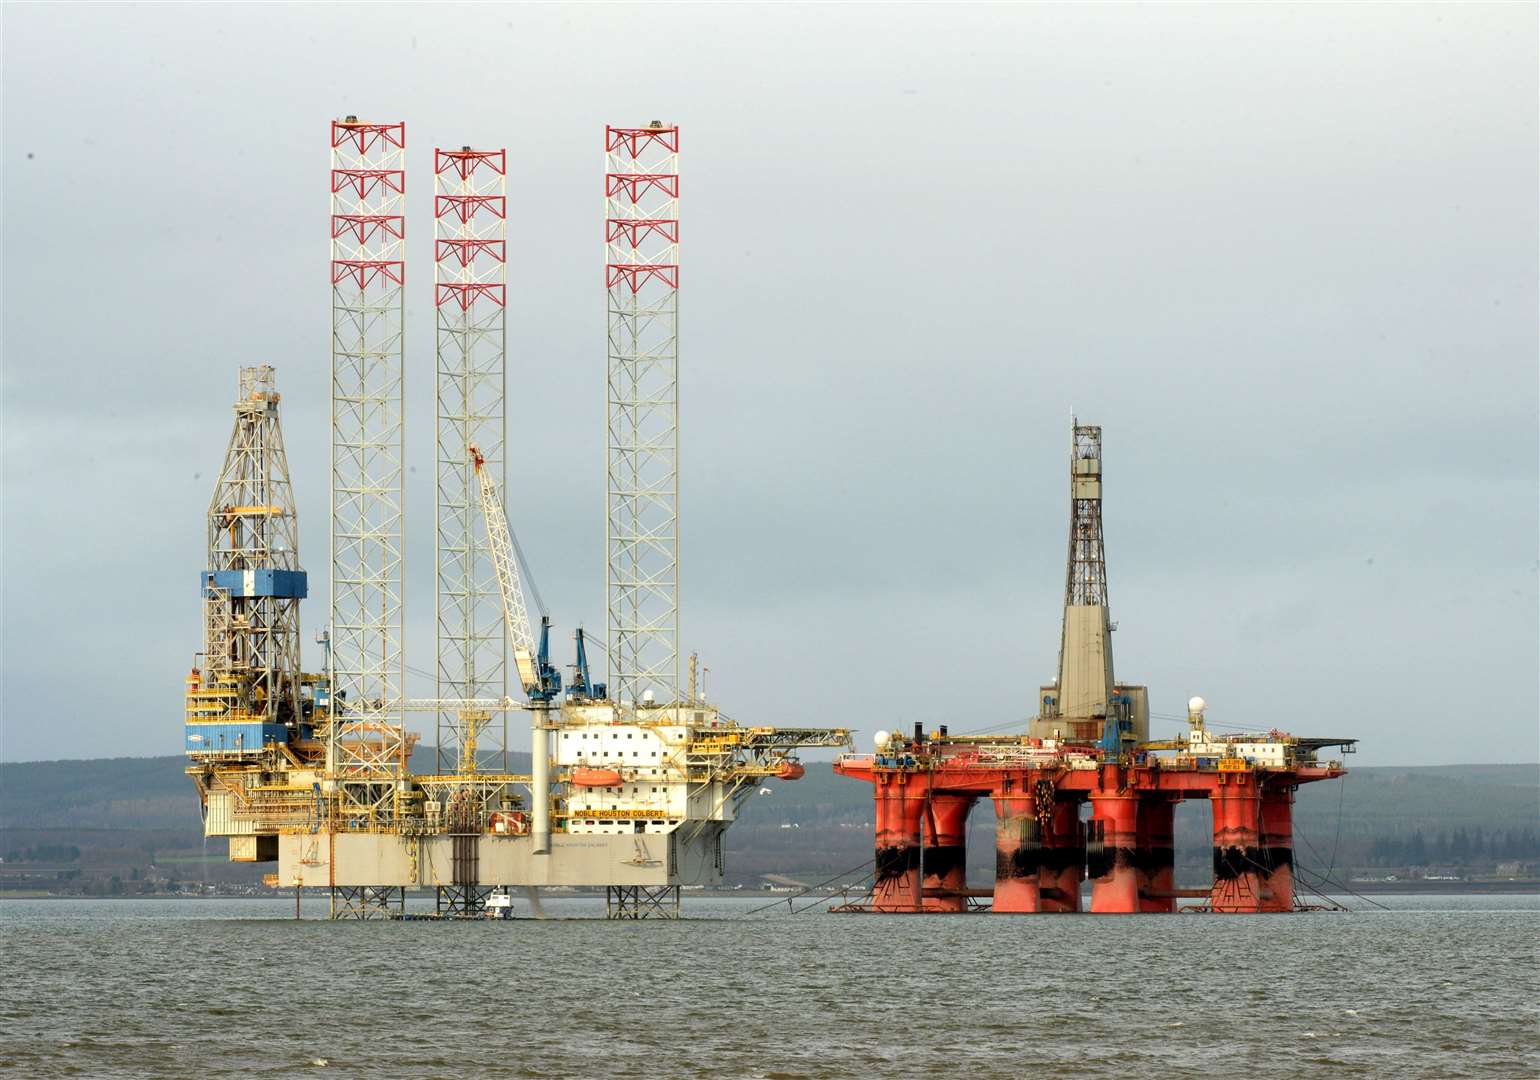 Do oil and gas exploration need to remain part of Scotland's energy strategy for decades to come? .